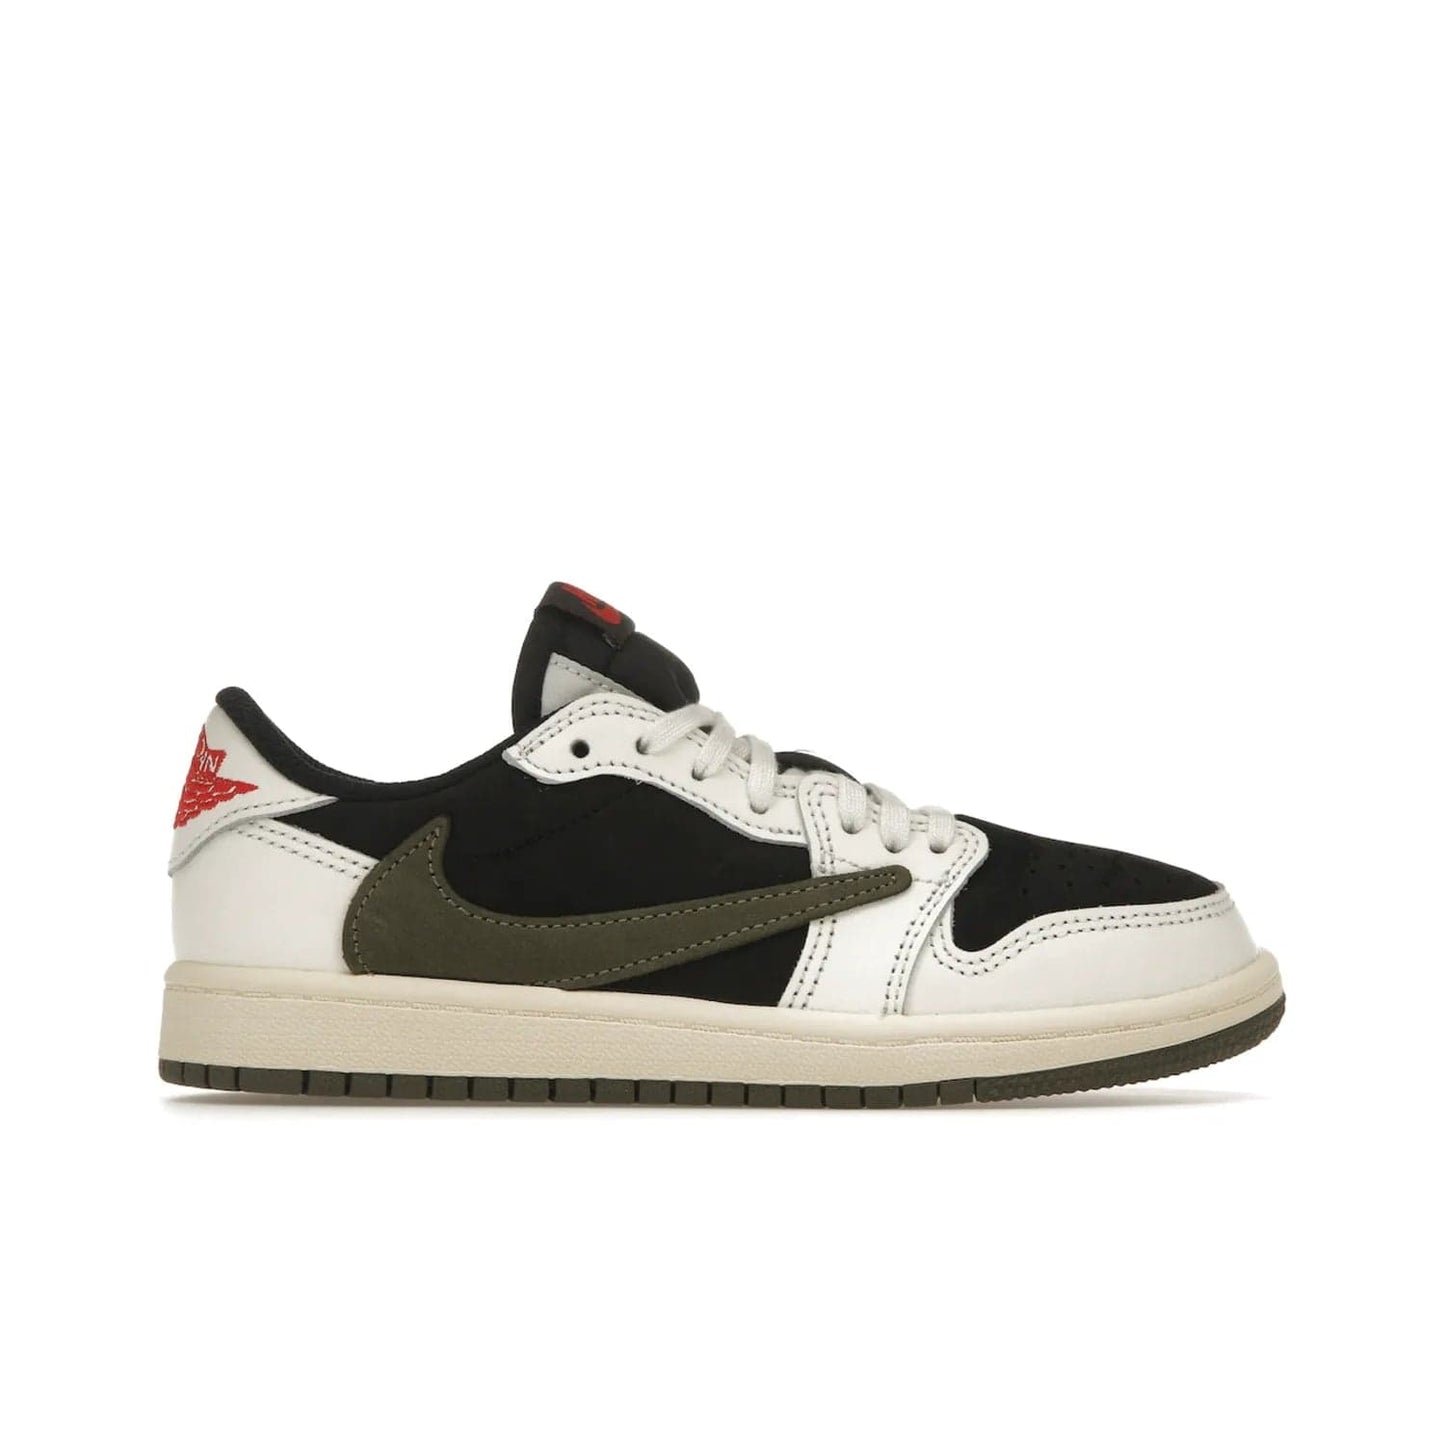 Jordan 1 Retro Low OG SP Travis Scott Olive (PS) - Image 1 - Only at www.BallersClubKickz.com - Jordan 1 Retro Low OG SP Travis Scott Olive: A Sail upper, Red and Black accents, and Olive midsole combine for a classic sneaker that is perfect for any style.